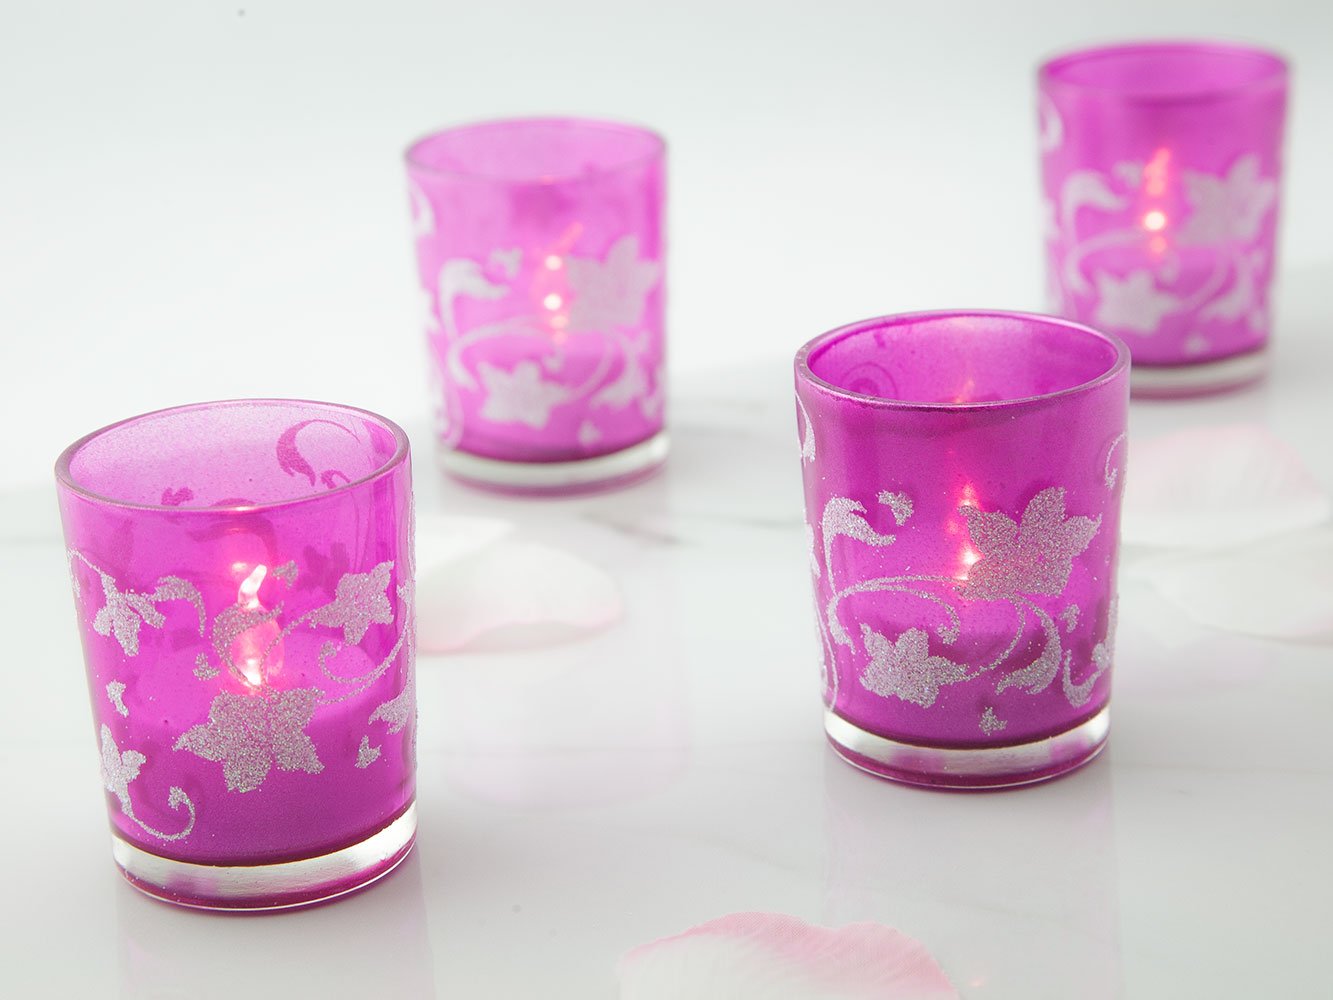  Violet Floral Holiday Votive Tea Light Candle Holders Gift Set (4 PACK) - AsianImportStore.com - B2B Wholesale Lighting and Decor